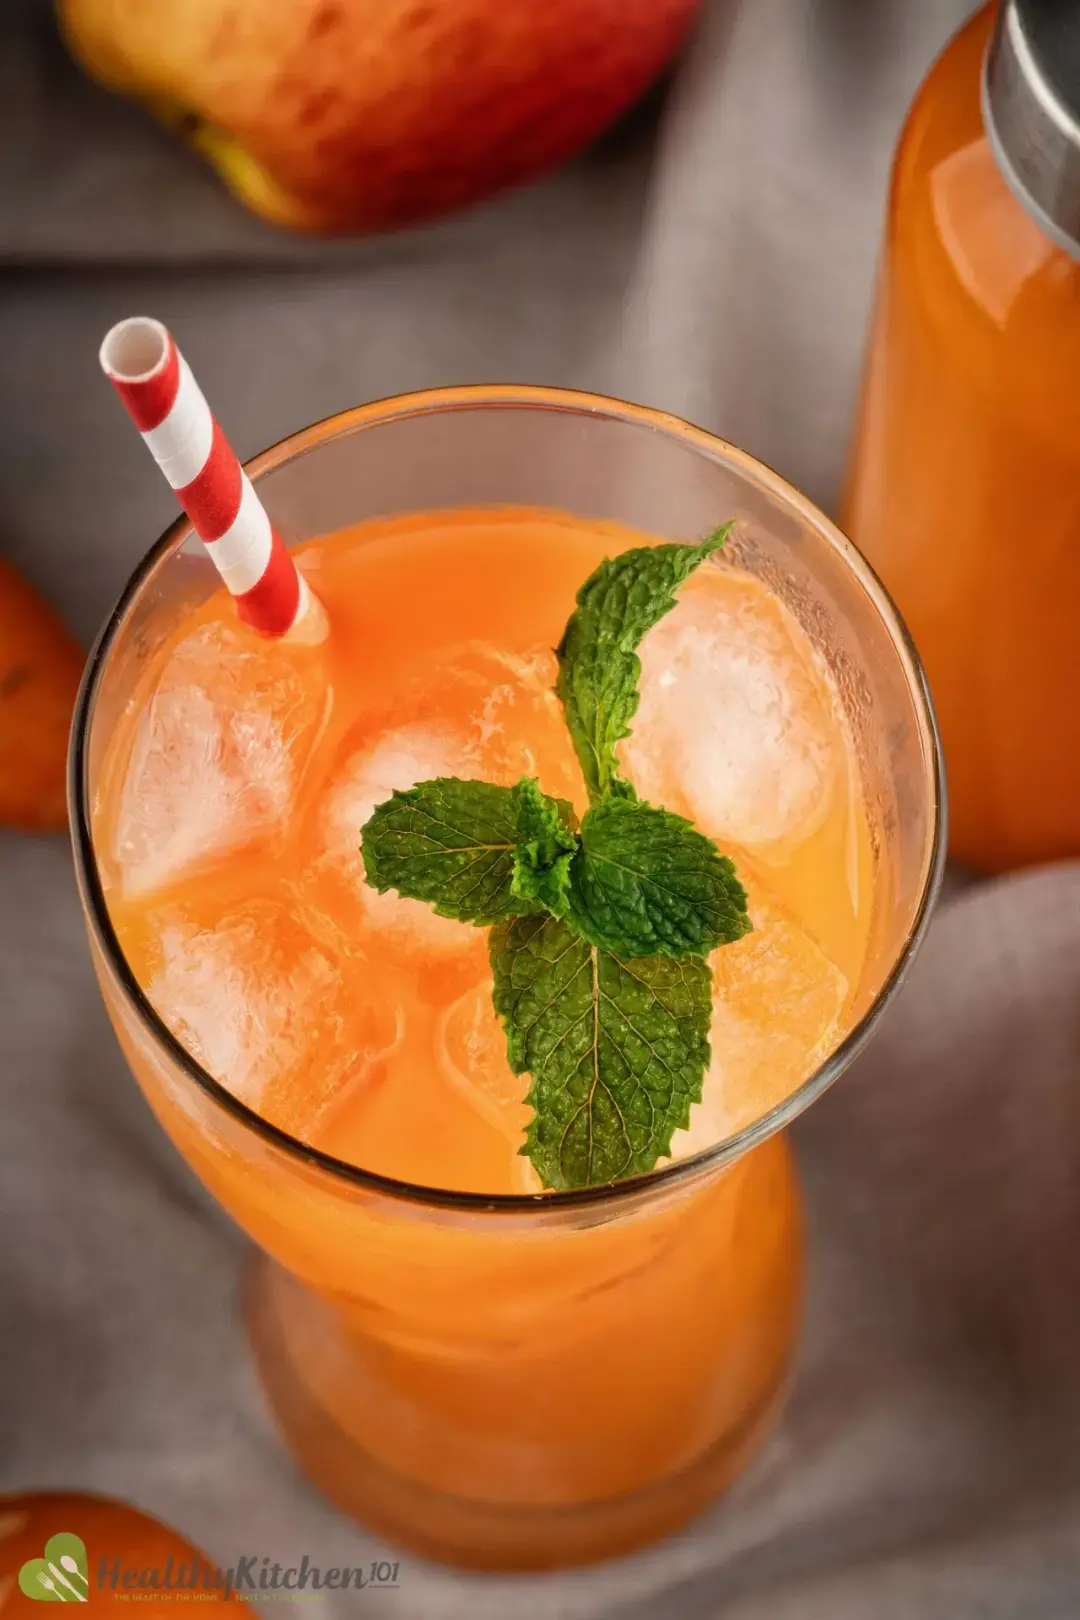 An iced glass of carrot juice with a red striped straw and a mint sprig